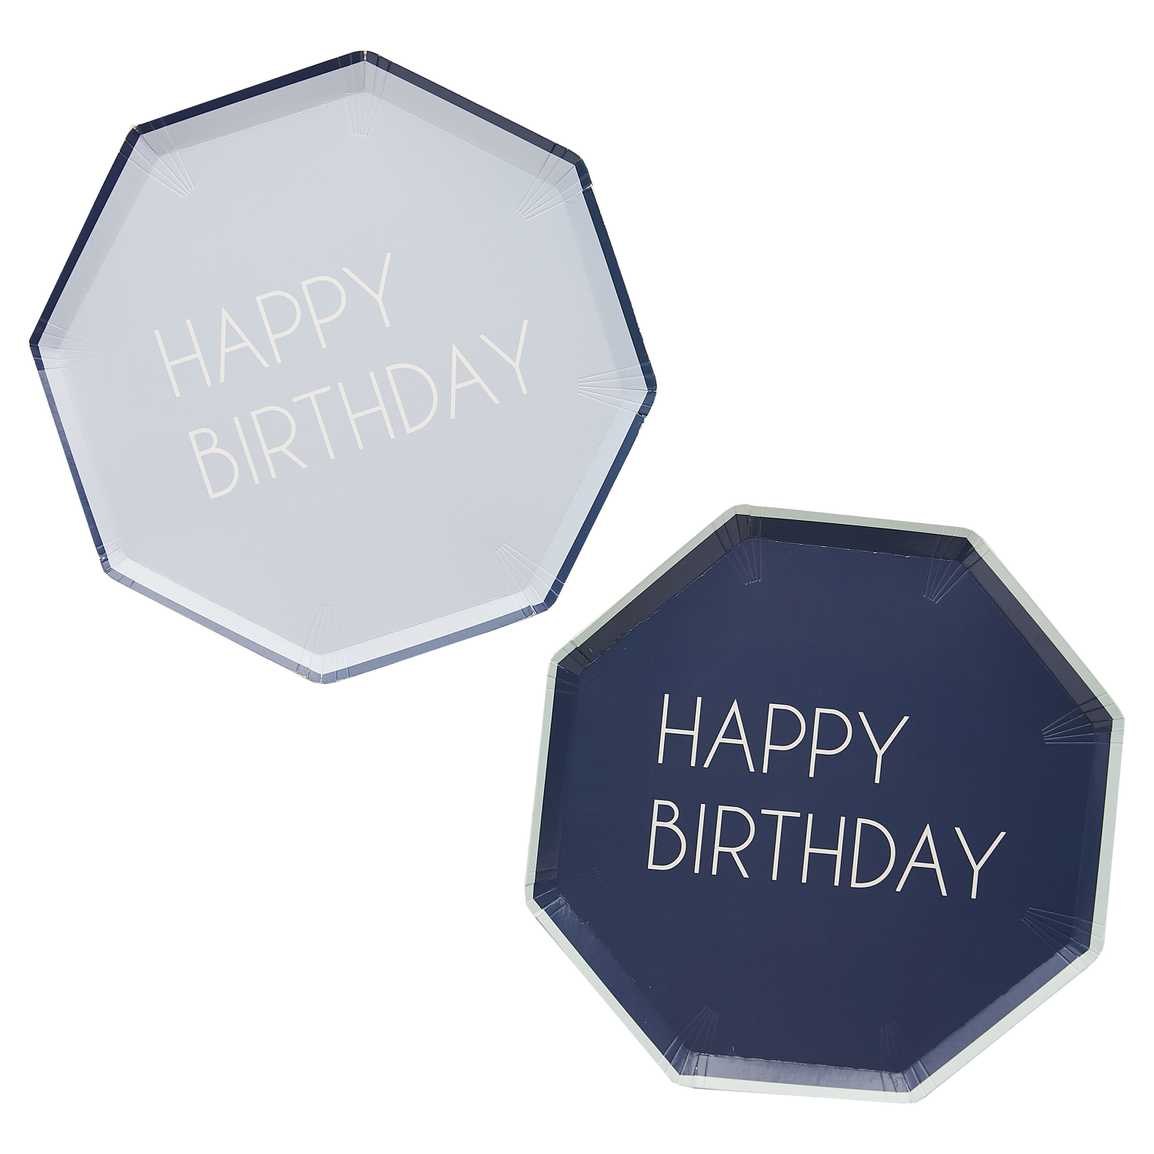 Navy & Blue Happy Birthday Paper Plates - Muddy Boots Home UK